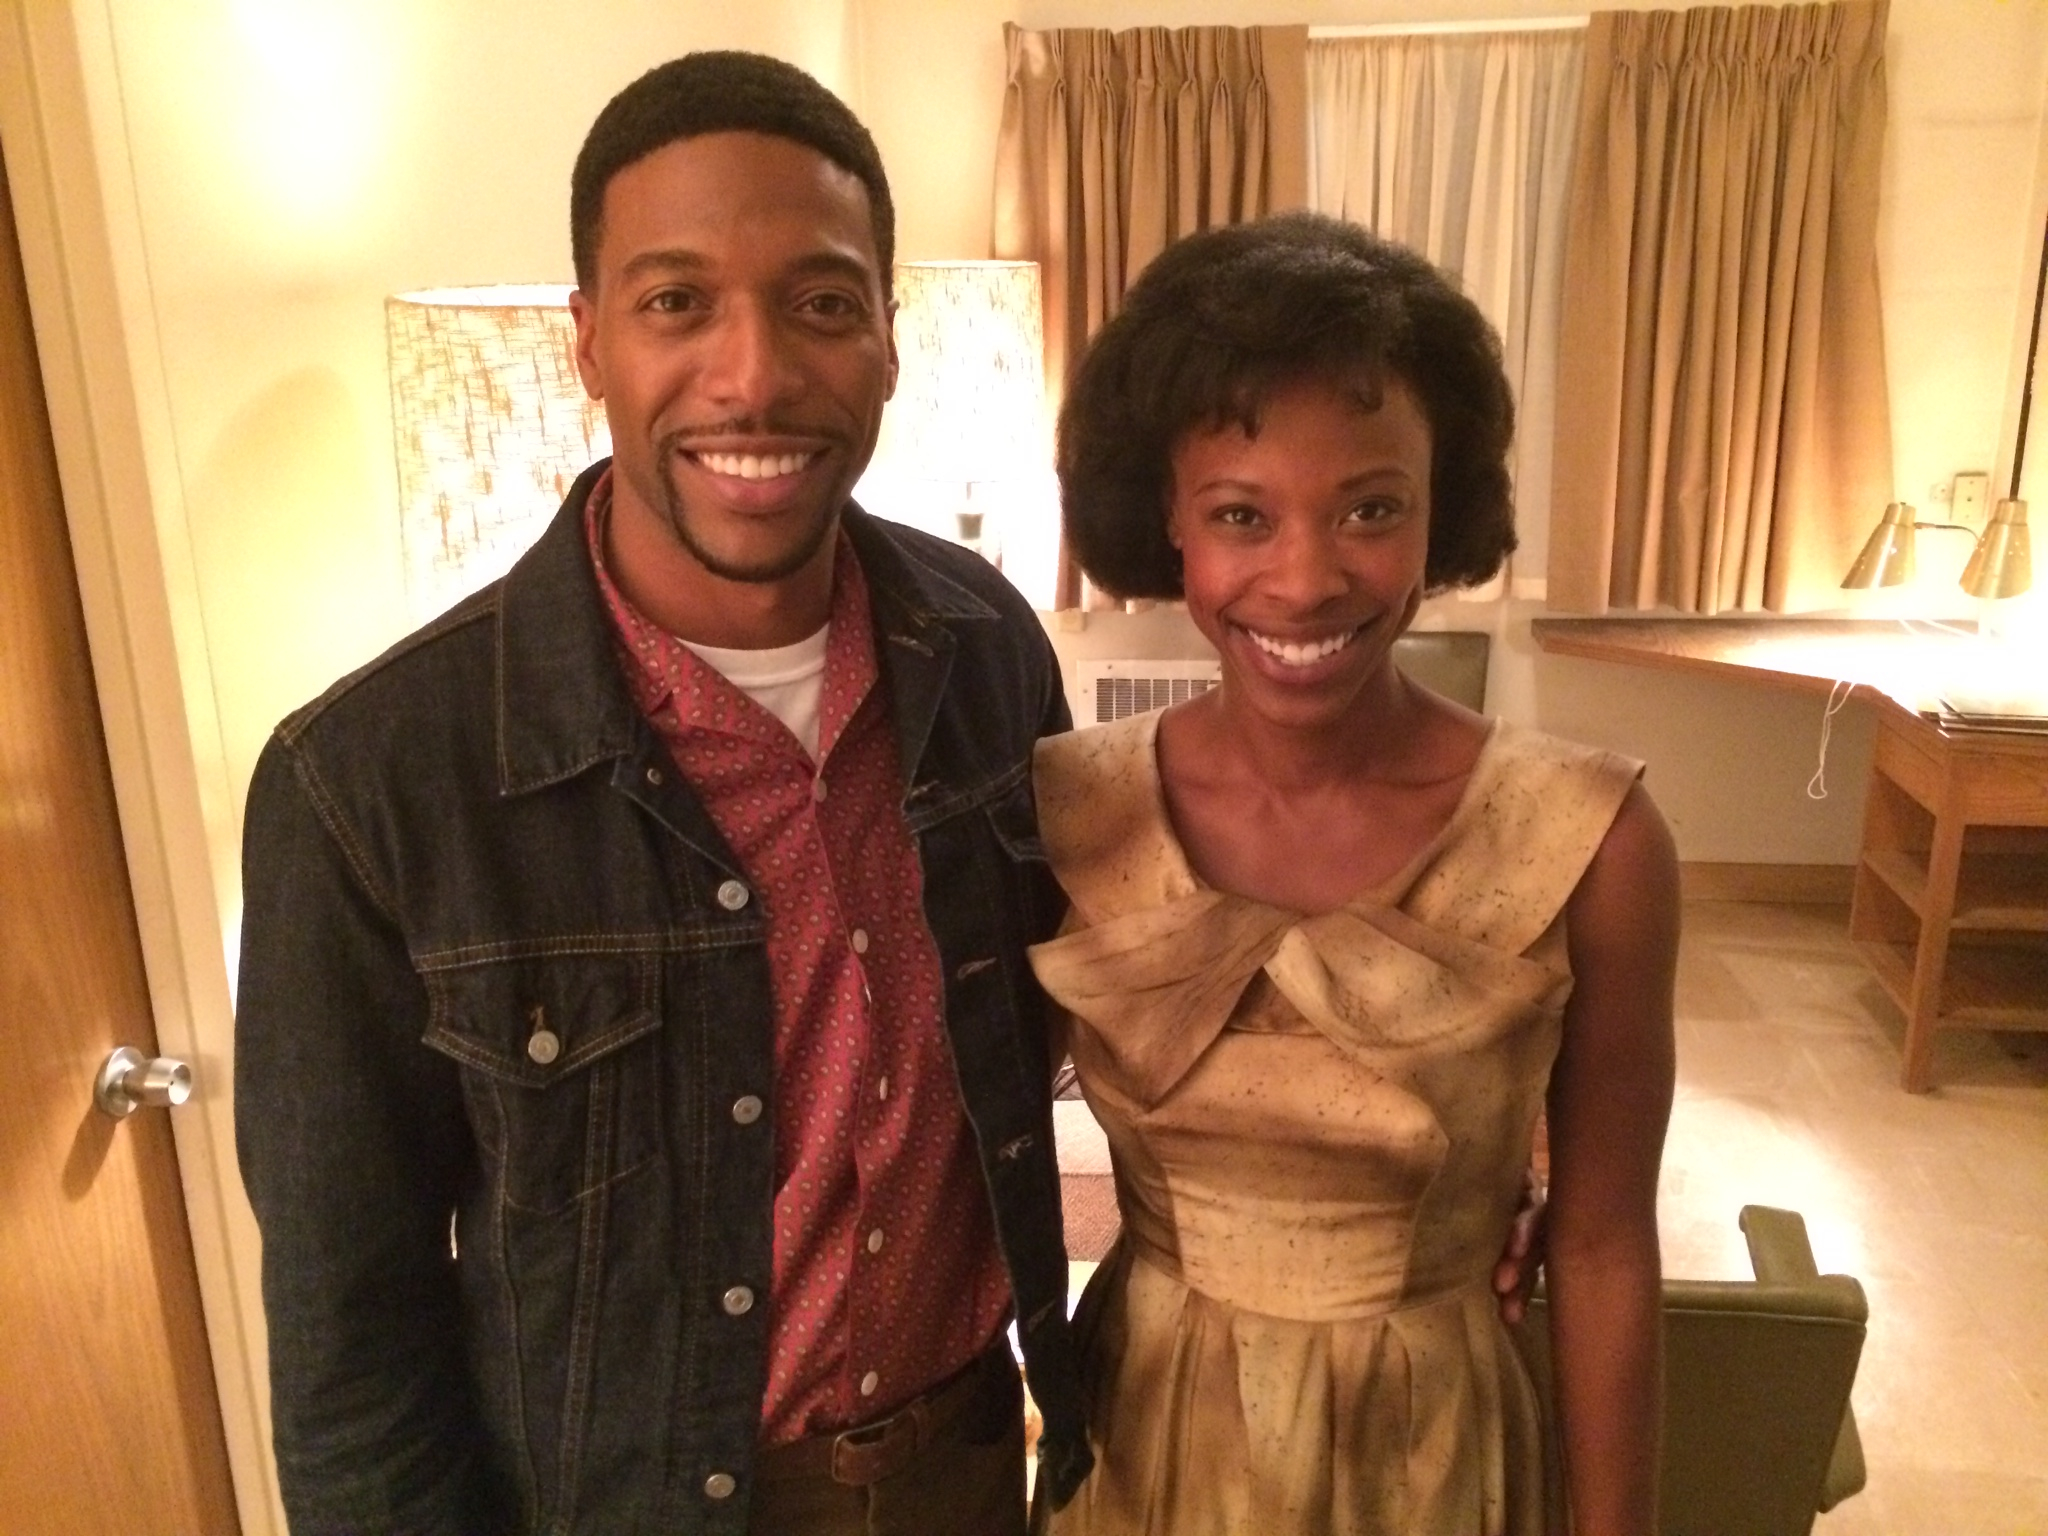 Karimah Westbrook and Jocko Sims on the set of Masters of Sex.